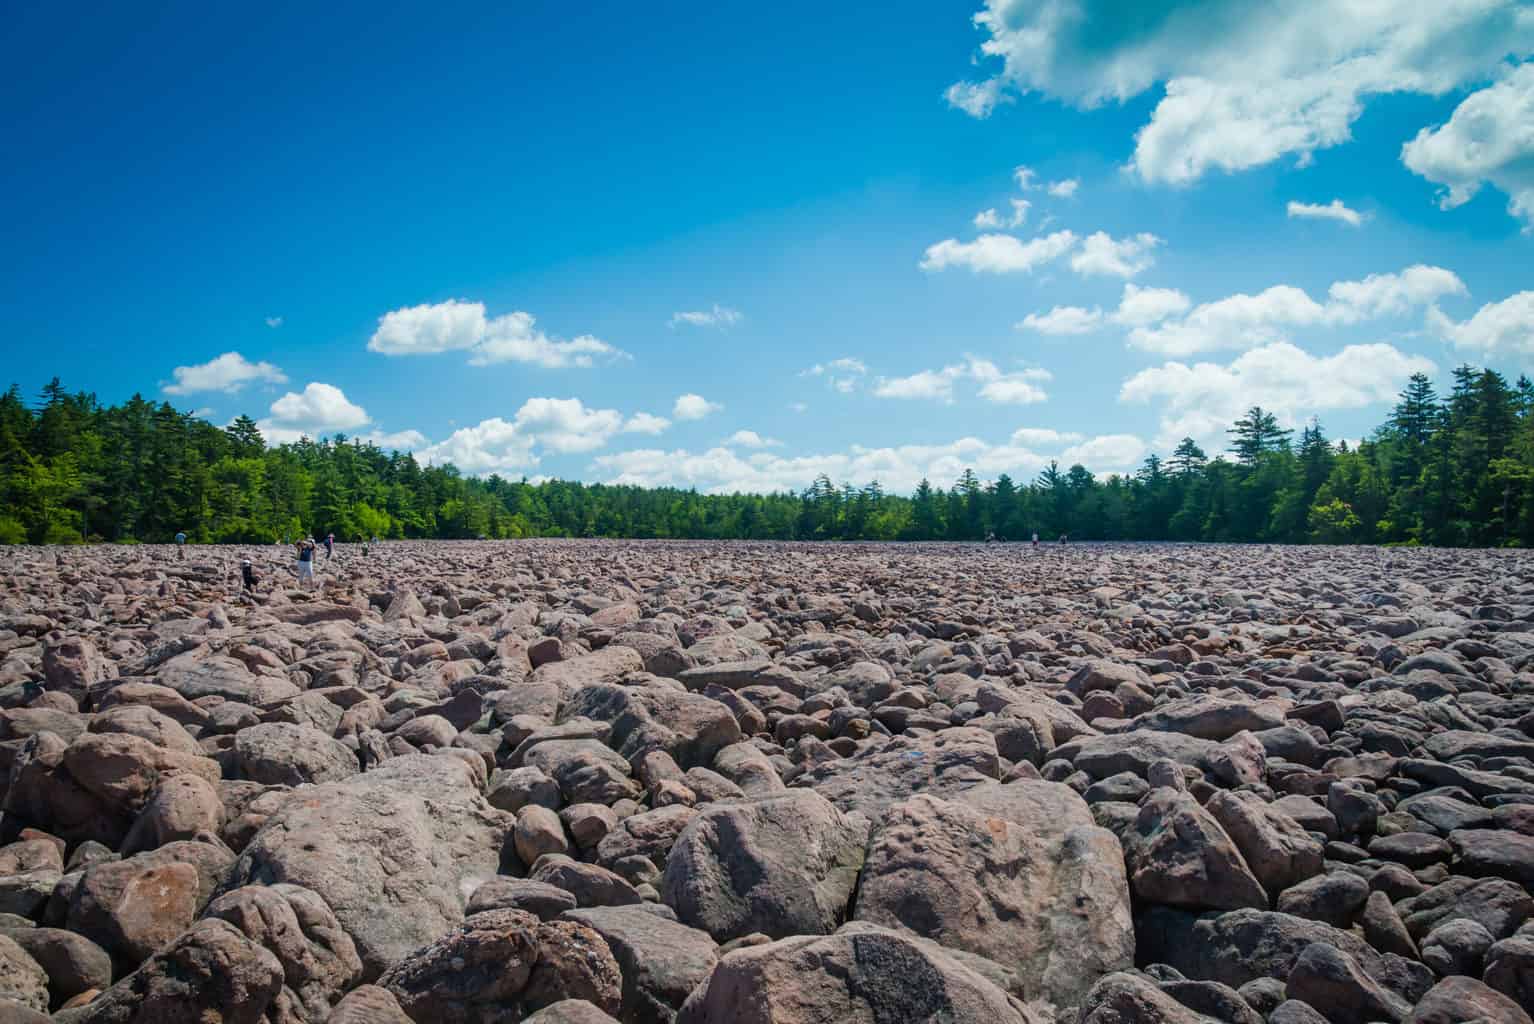 The Boulder Field in Hickory Run State Park in Pennsylvania.